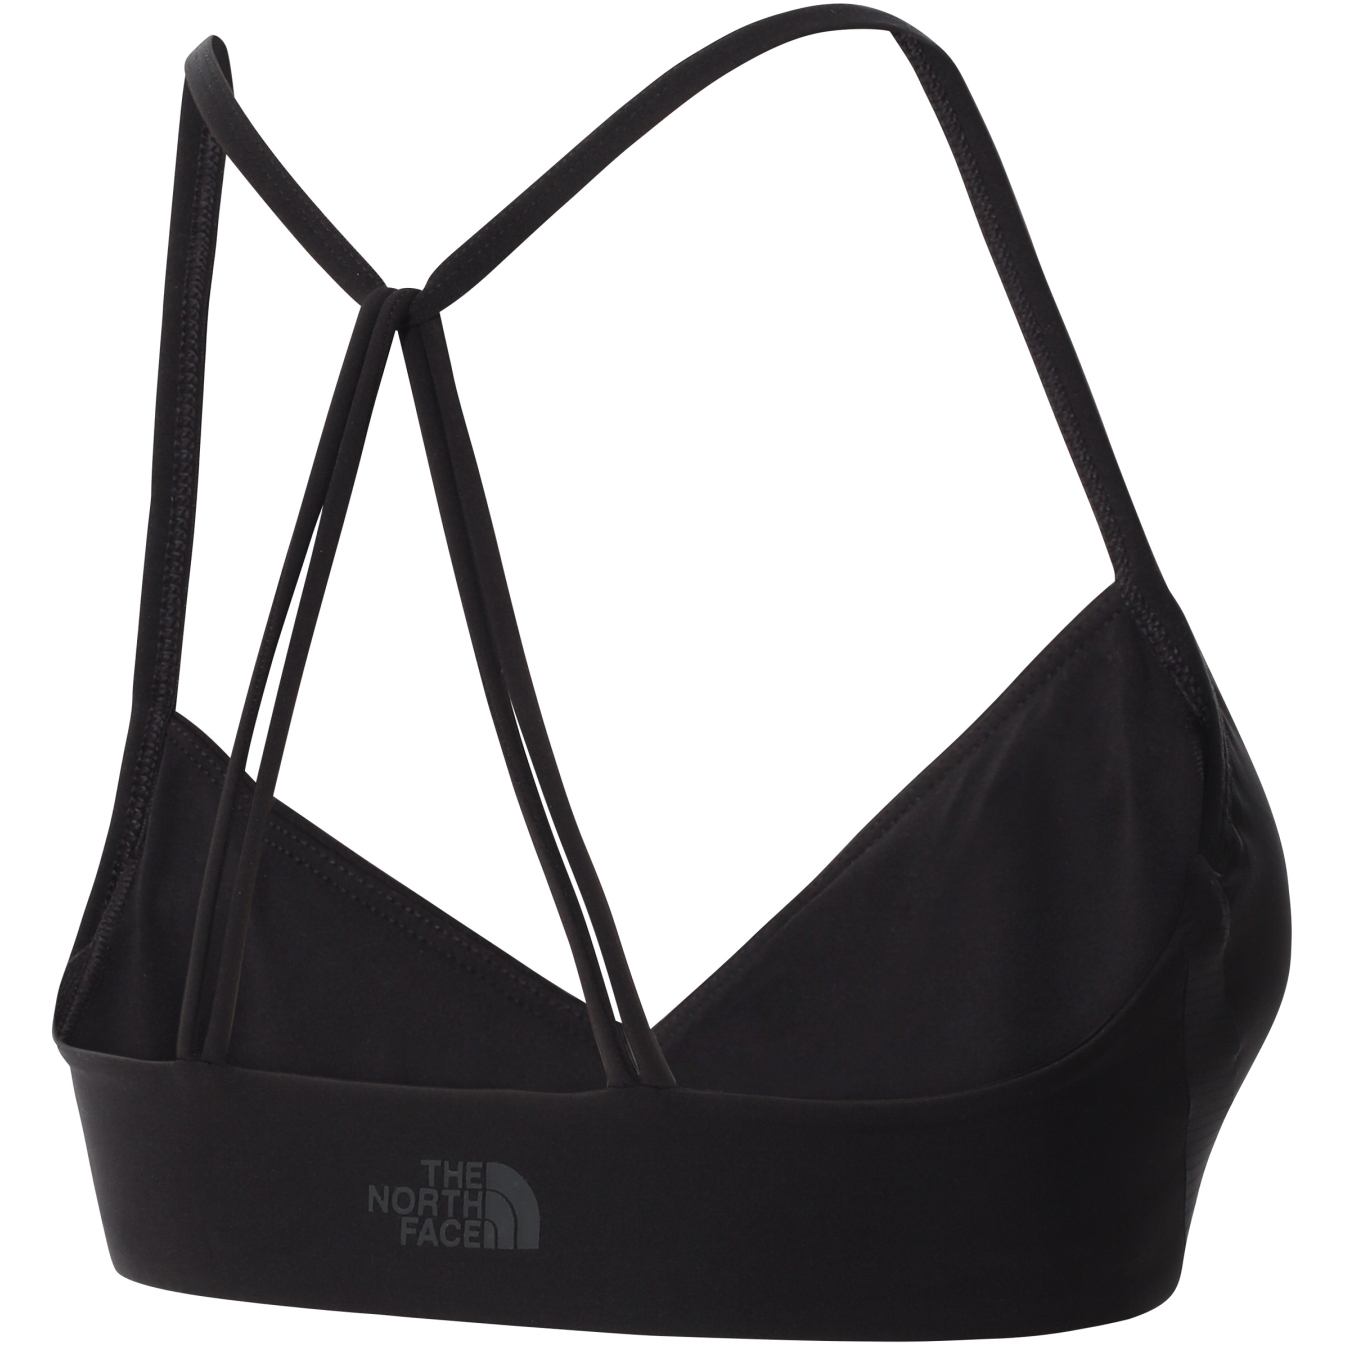 The North Face Motivation Strappy Sports Bra - Women's - Clothing